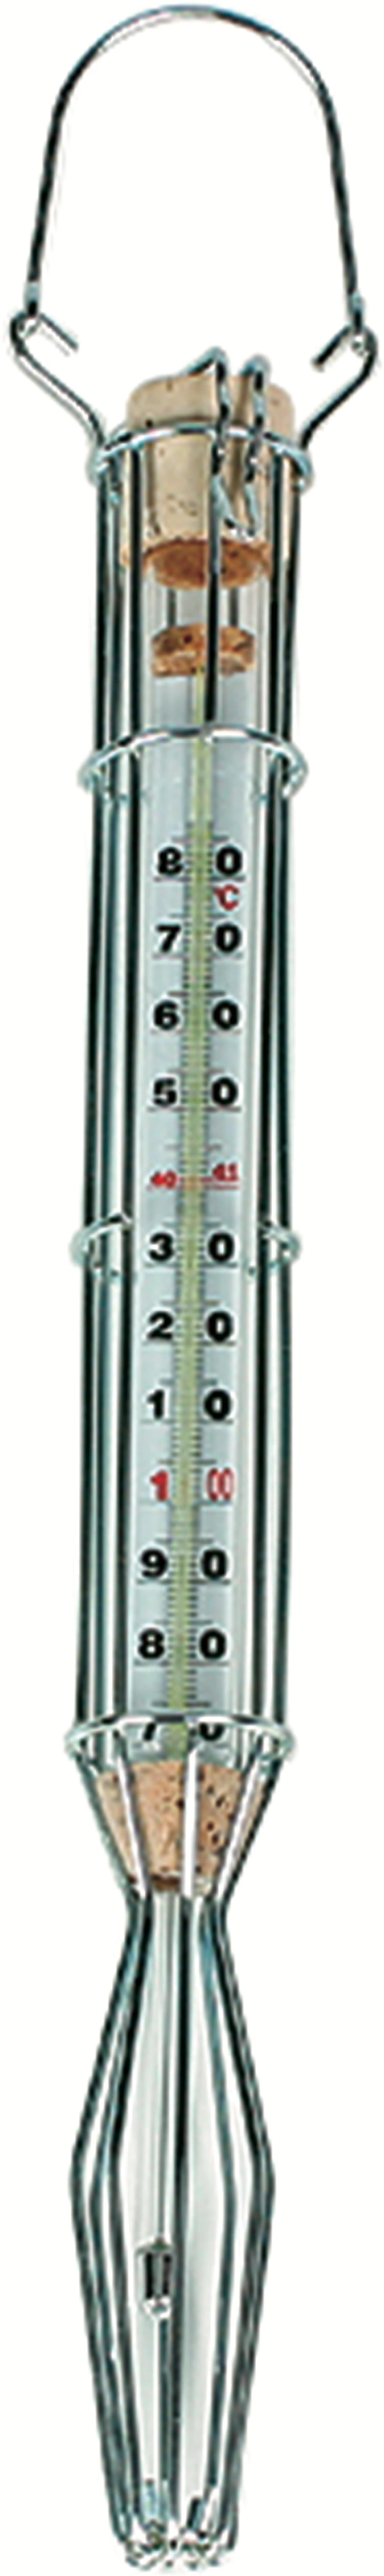 Thermometers 160002